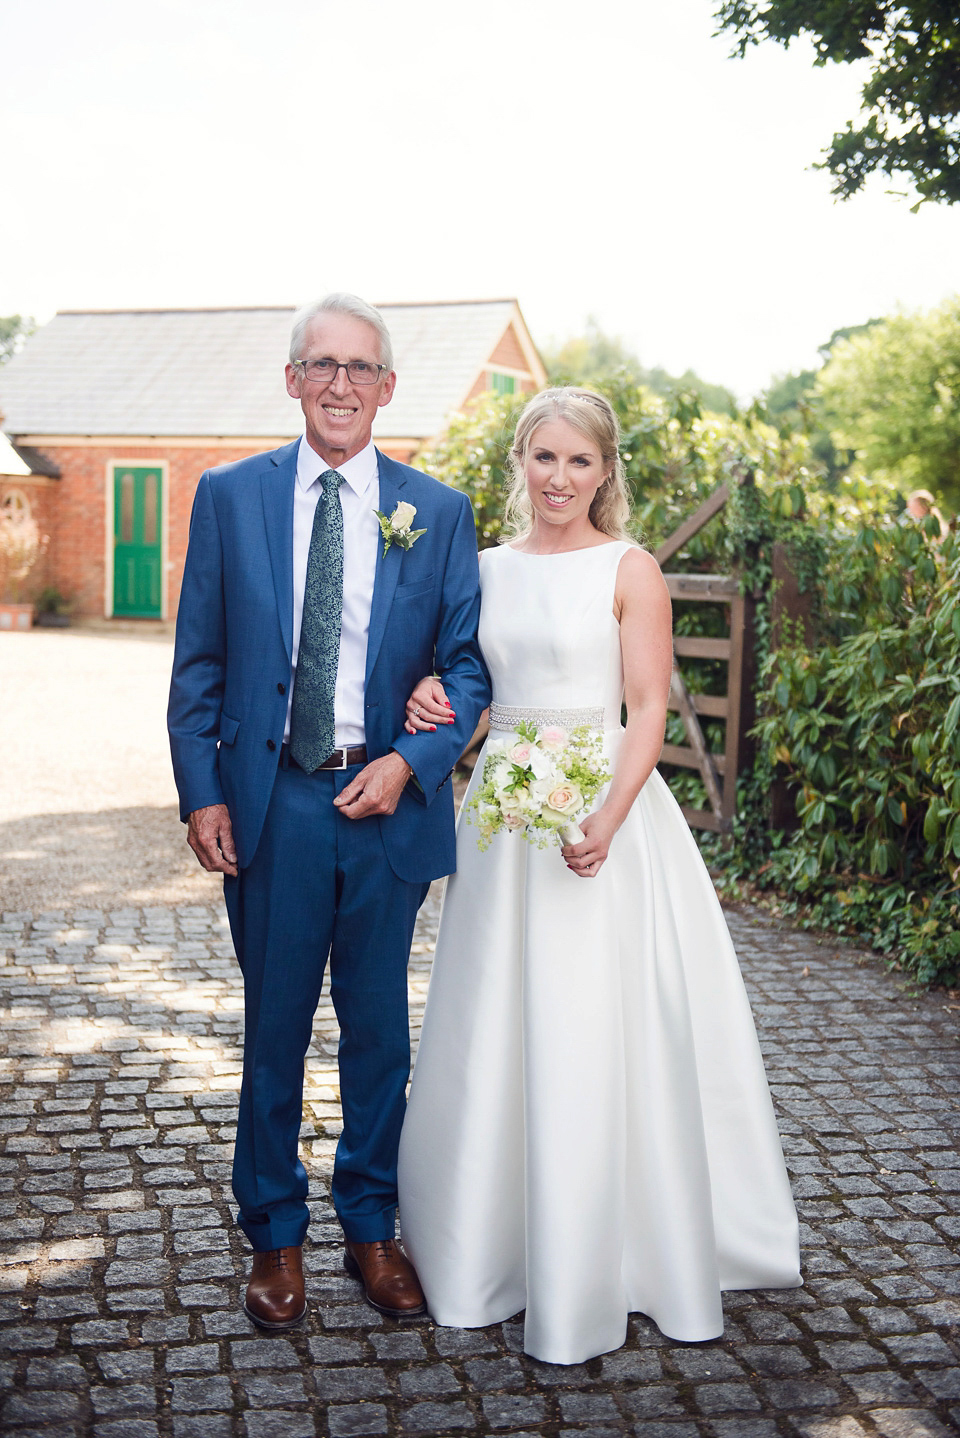 Bride Rosanna wore a Jesus Peiro gown from Miss Bush Bridal in Surrey for her glamorous and romantic English country garden wedding. Photography by Juliet McKee.